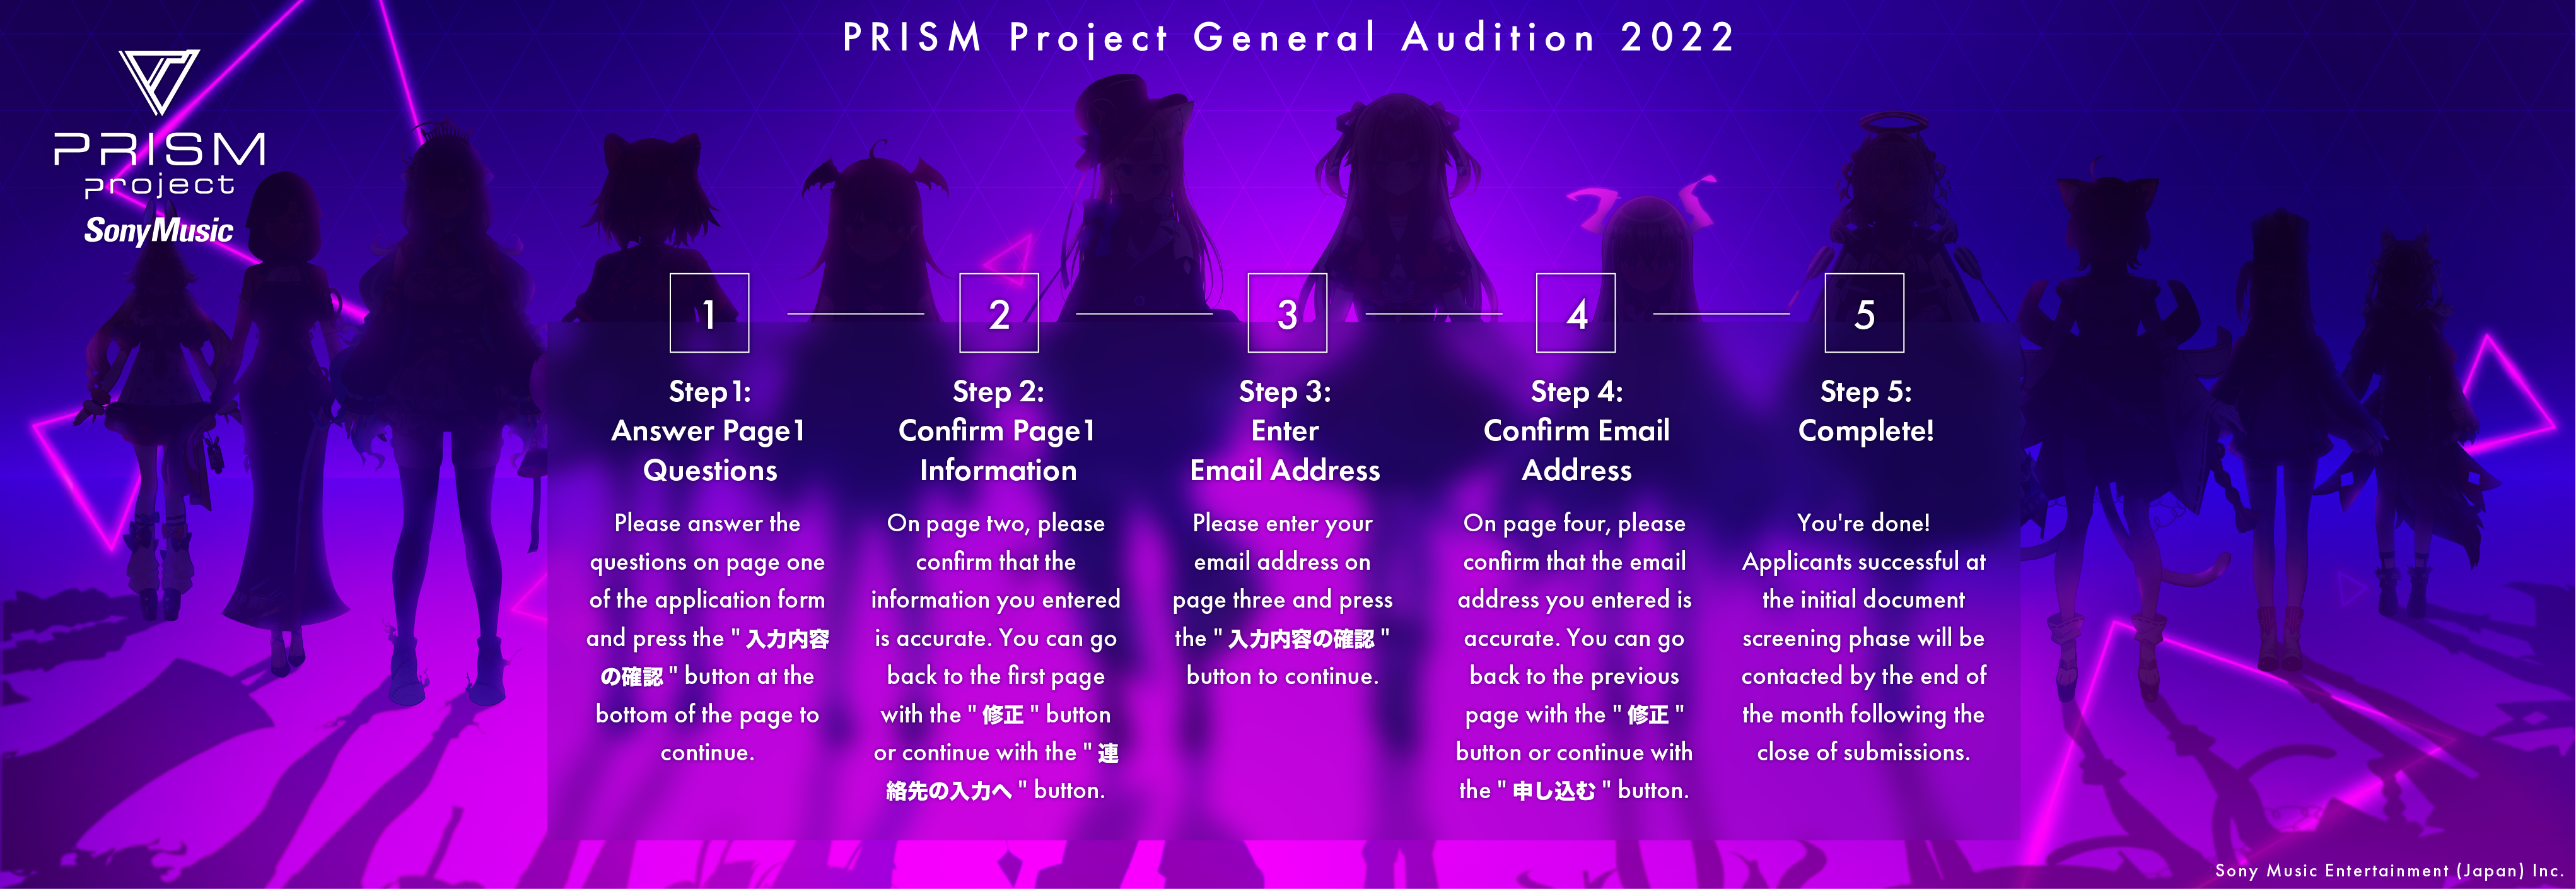 PRISM Project General Audition 2022